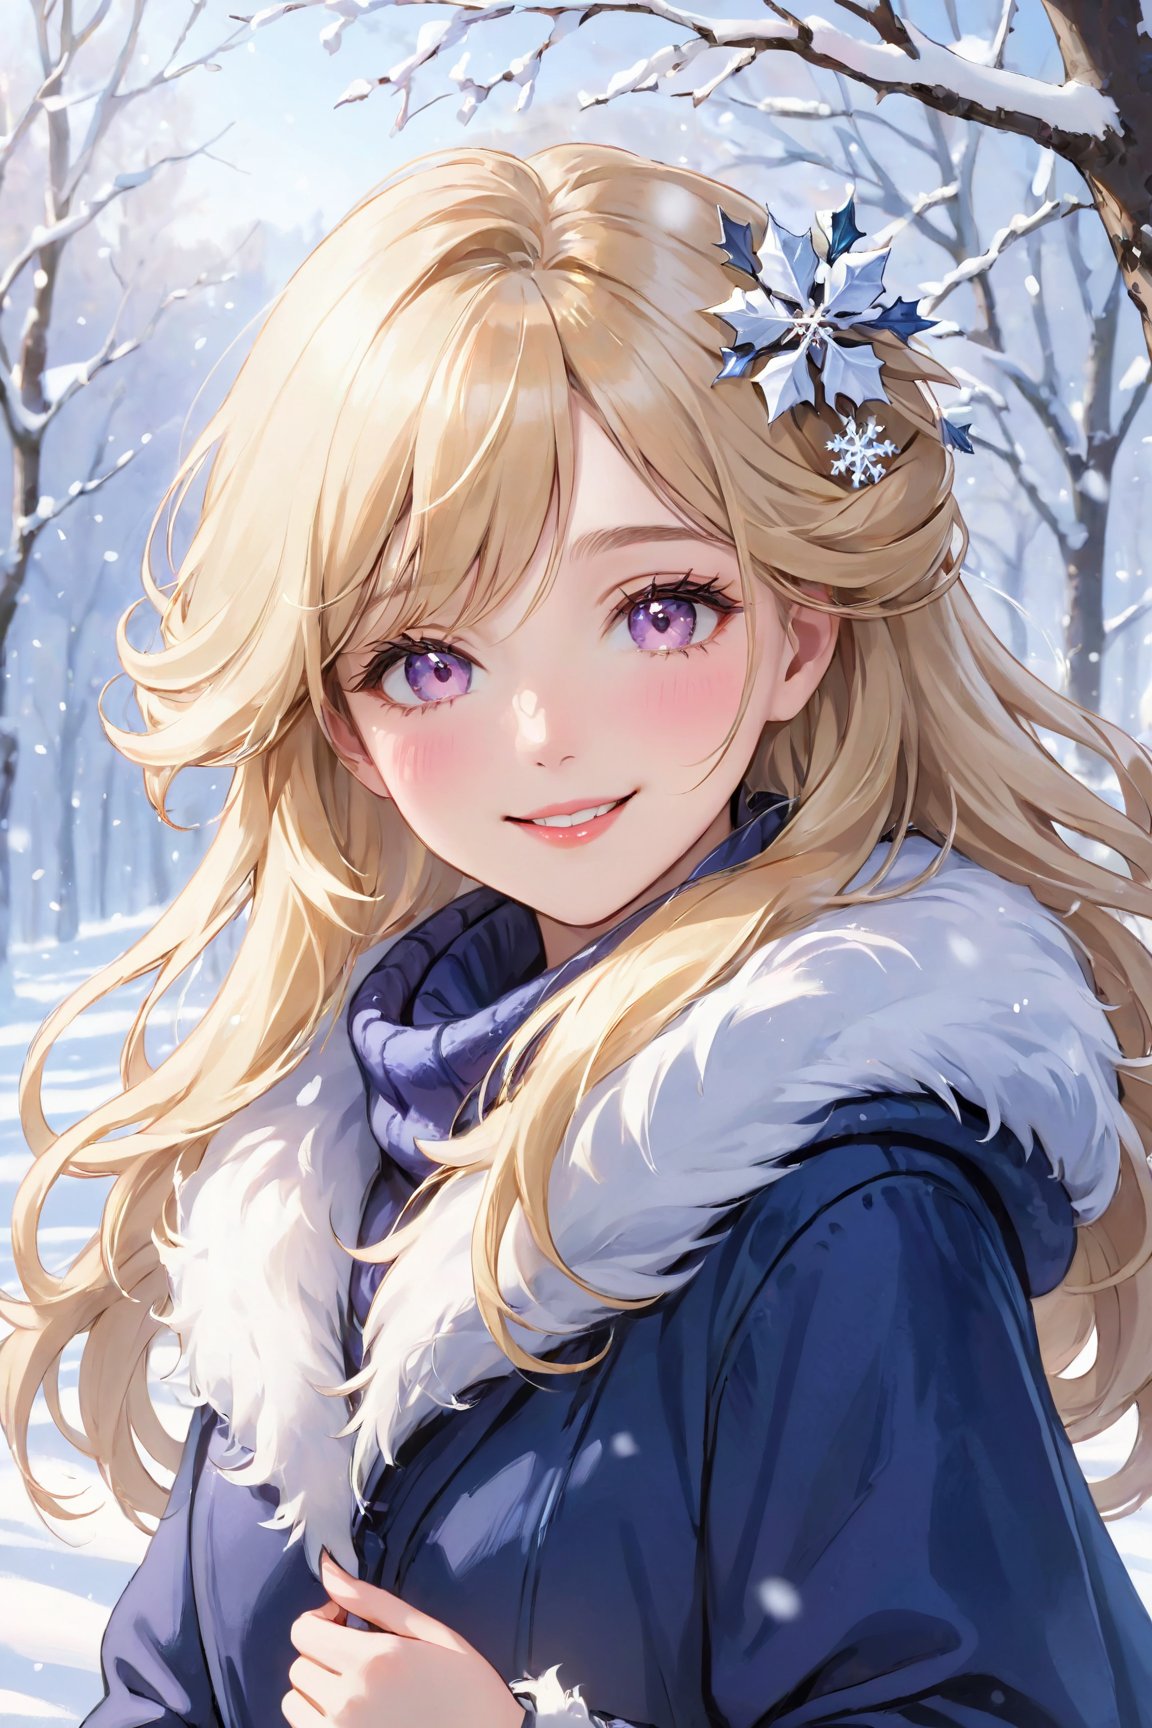 (best quality,4k,8k,highres,masterpiece:1.2),ultra-detailed,portrait,beautiful and smiling caucasian woman,cinematic,winter clothes,Ondas e Nuances,detailed symmetric hazel eyes,circular iris,vivid colors,winter scenery,soft snowflakes falling,icy breath,rosy cheeks,pure white background,subtle warm lighting,innocence and radiance,sparkling eyes,joyful expression,luxurious fur trim on the clothing,frosty winter air,subtle wind blowing through her hair,subtle hint of pink in her lips,elegant posture,confident stance,delicate snowflakes decorating her hair,long flowing blonde hair,wonder and serenity in her gaze,captivating beauty,snow-covered trees in the background,peaceful and enchanting winter scene.